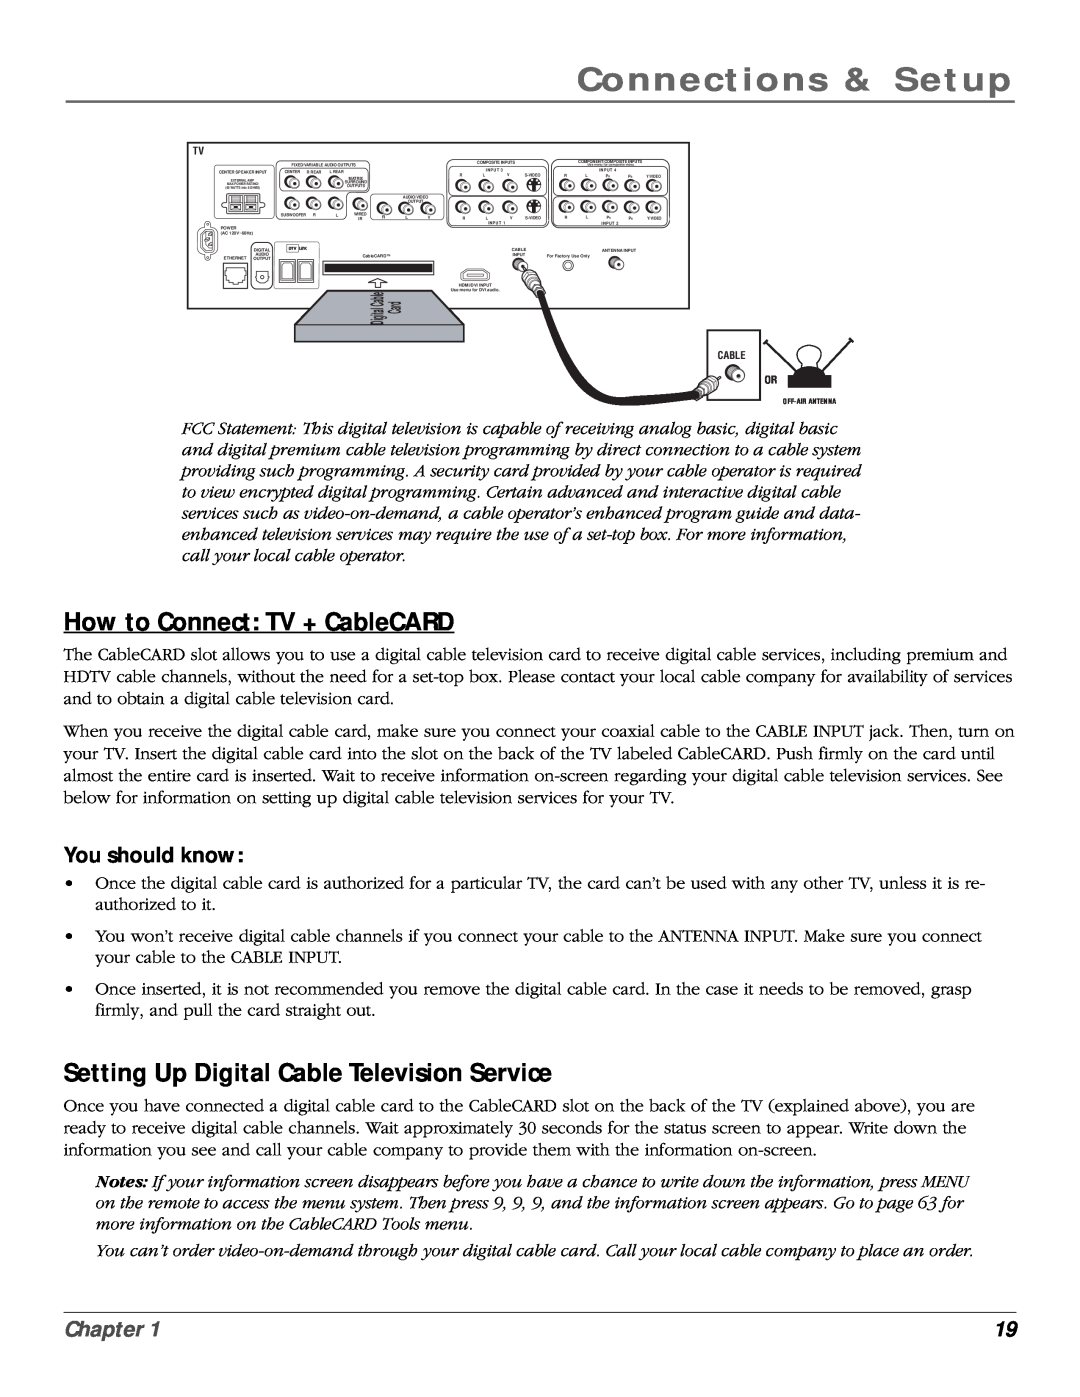 RCA scenium manual How to Connect TV + CableCARD, Setting Up Digital Cable Television Service, Connections & Setup, Chapter 